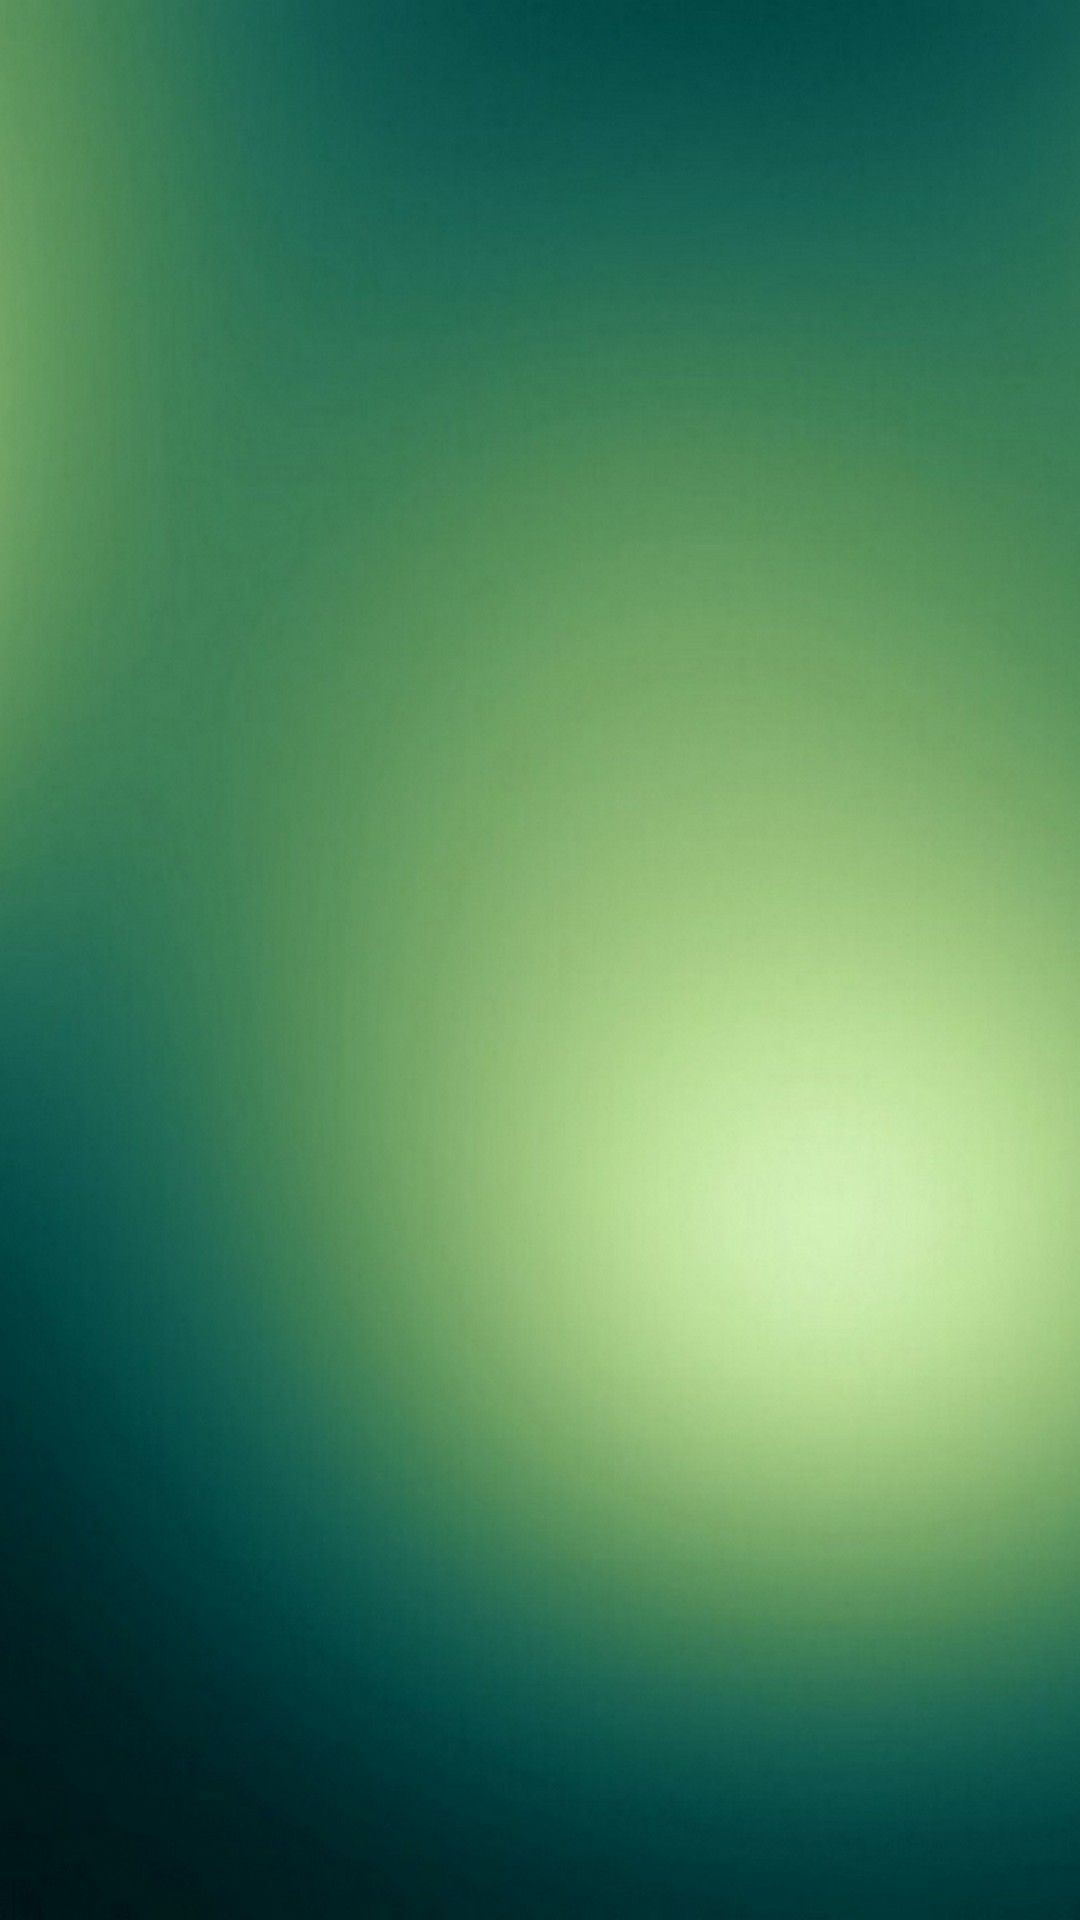 Wallpaper Emerald Green Android Android Wallpaper